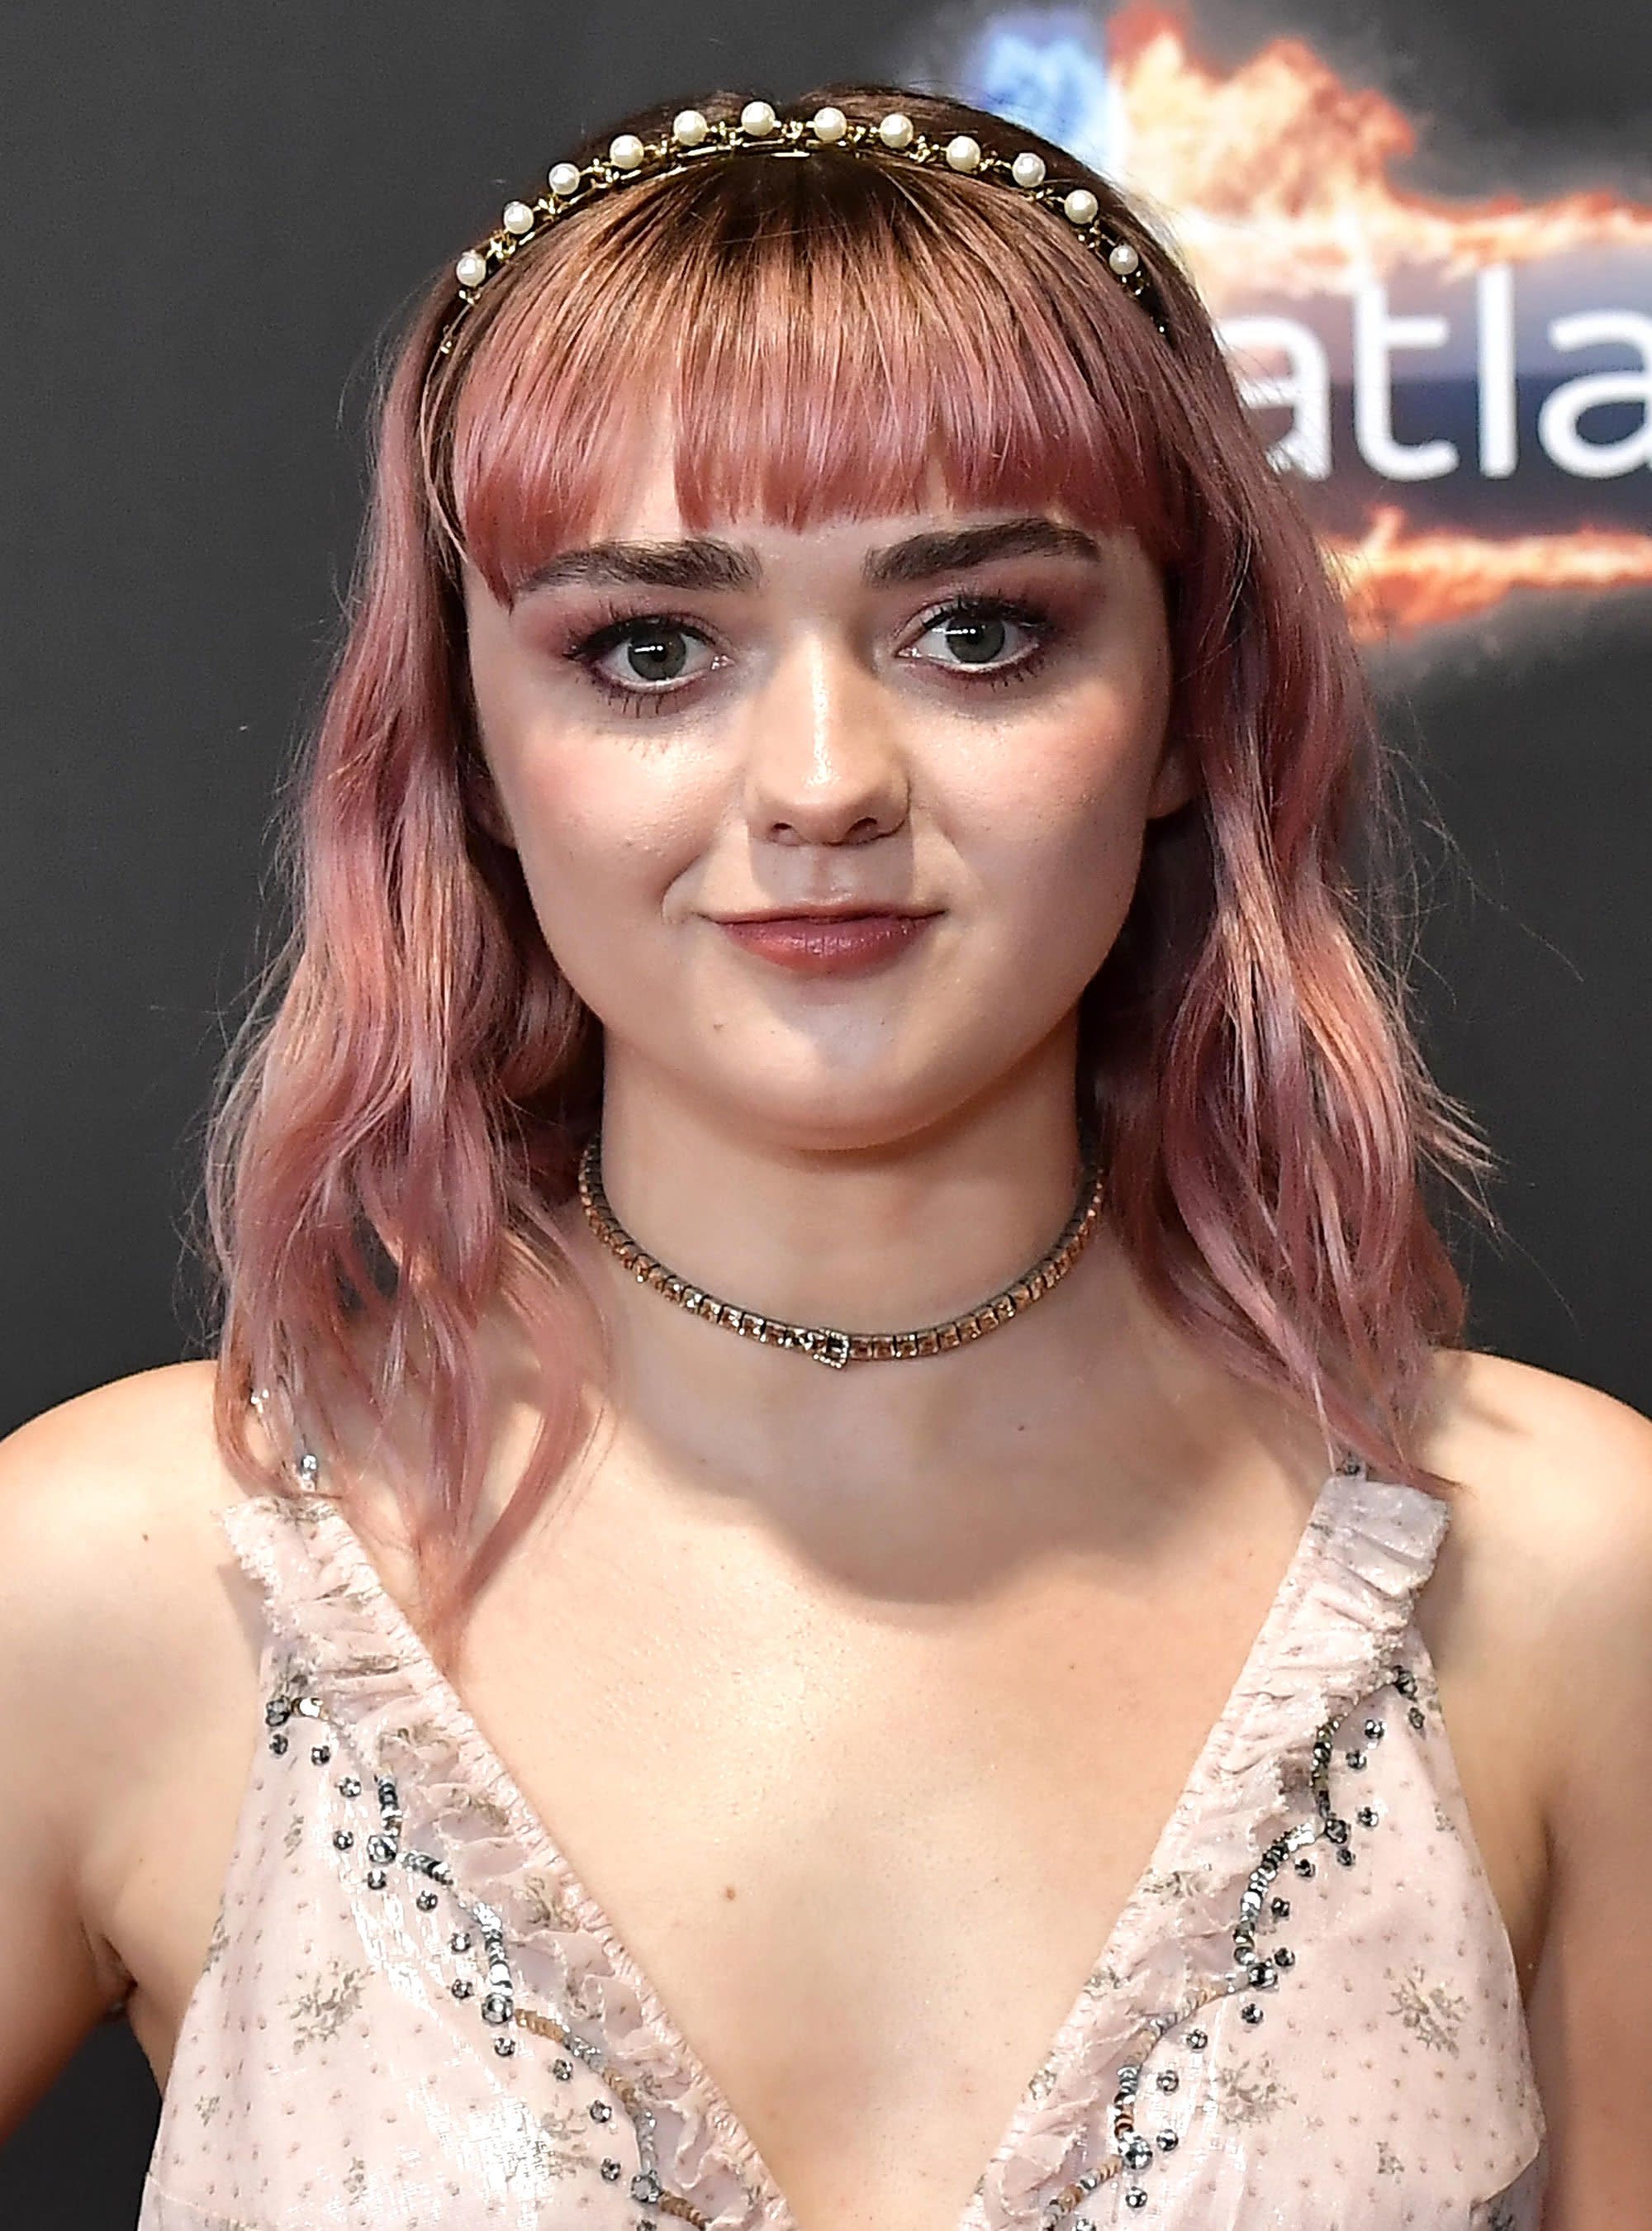 Maisie Williams Said Goodbye To Game Of Thrones With Another New Hair